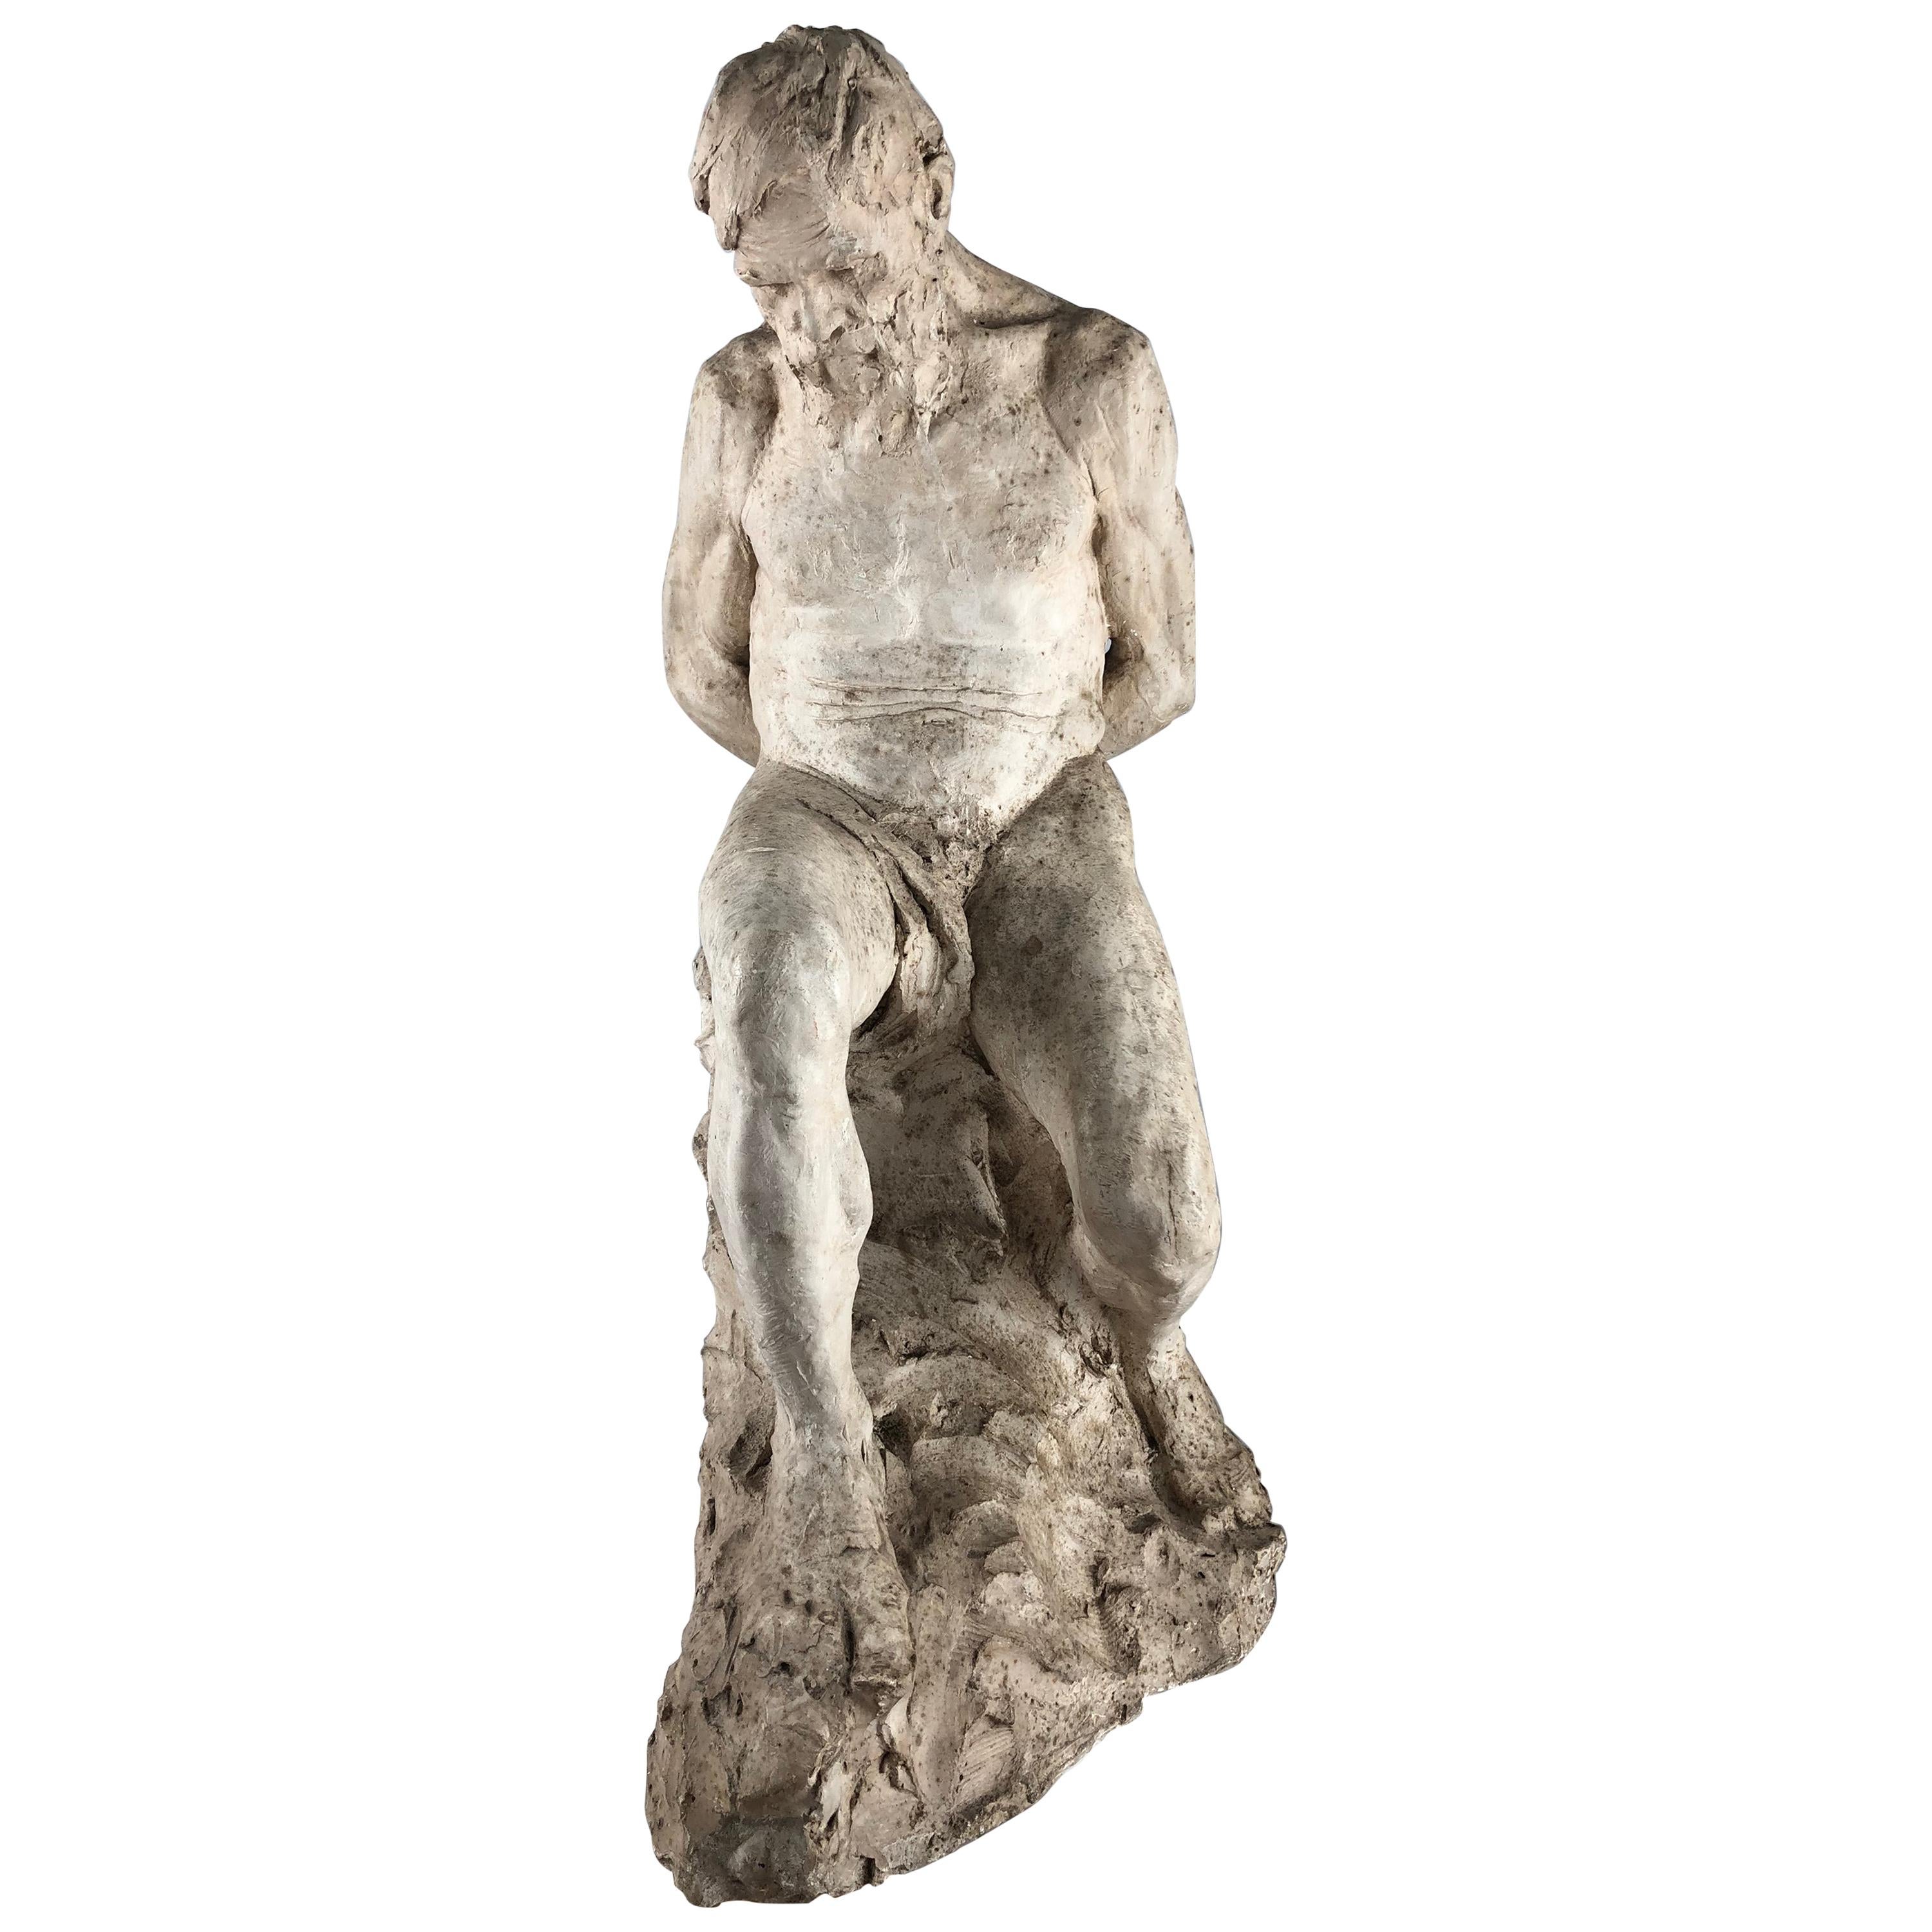 Sculpture of Plaster, signed Gallé and dated -93 (1893) For Sale